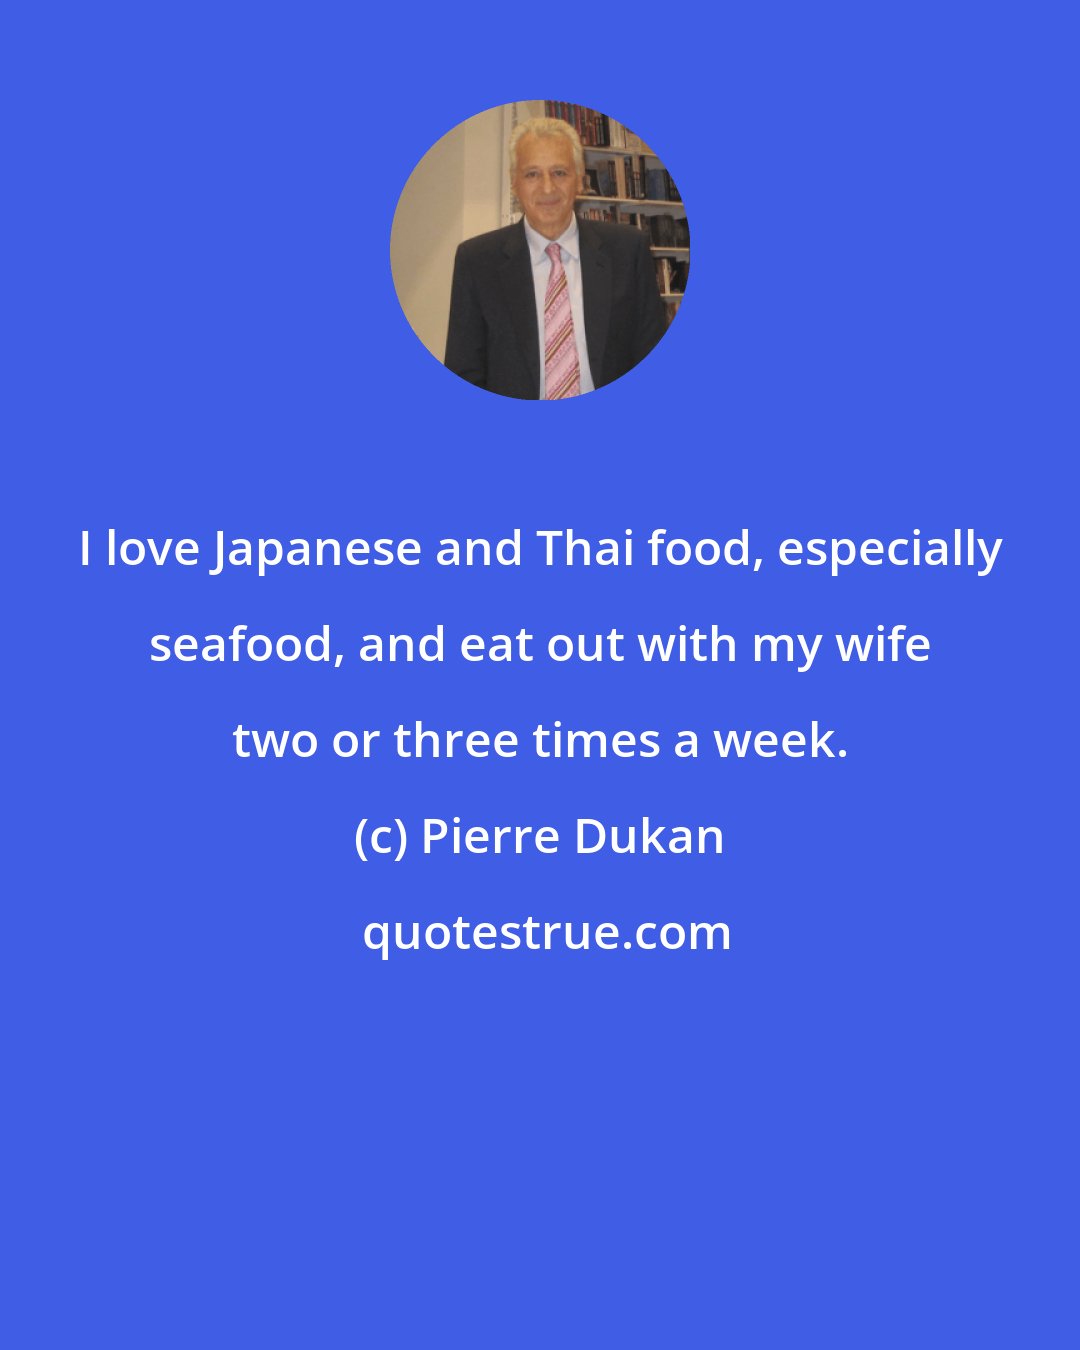 Pierre Dukan: I love Japanese and Thai food, especially seafood, and eat out with my wife two or three times a week.